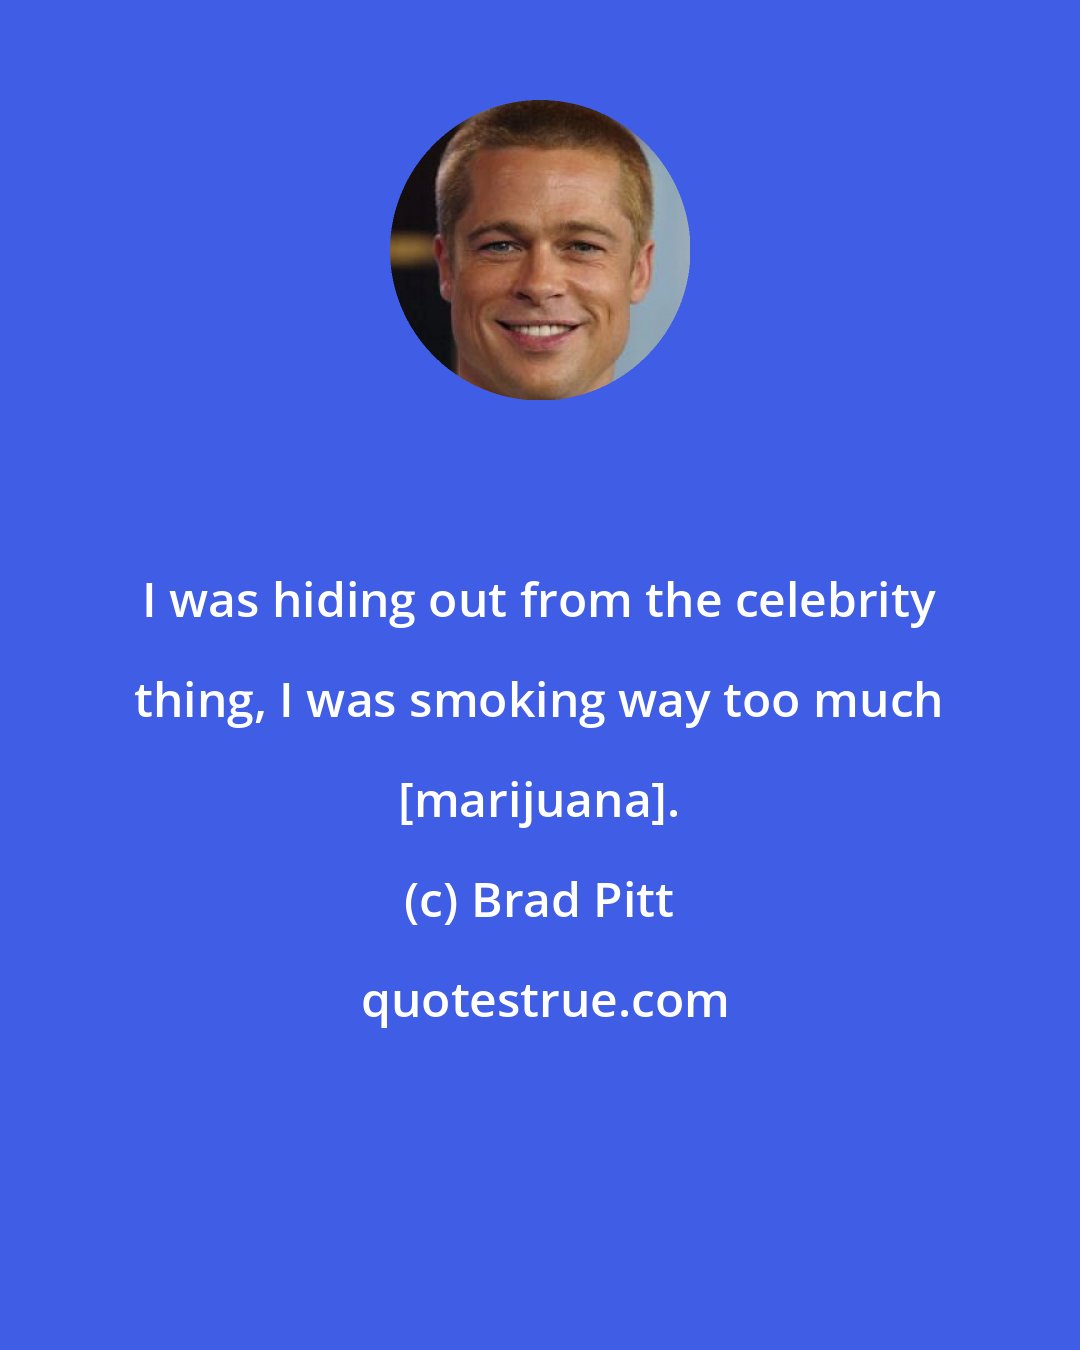 Brad Pitt: I was hiding out from the celebrity thing, I was smoking way too much [marijuana].